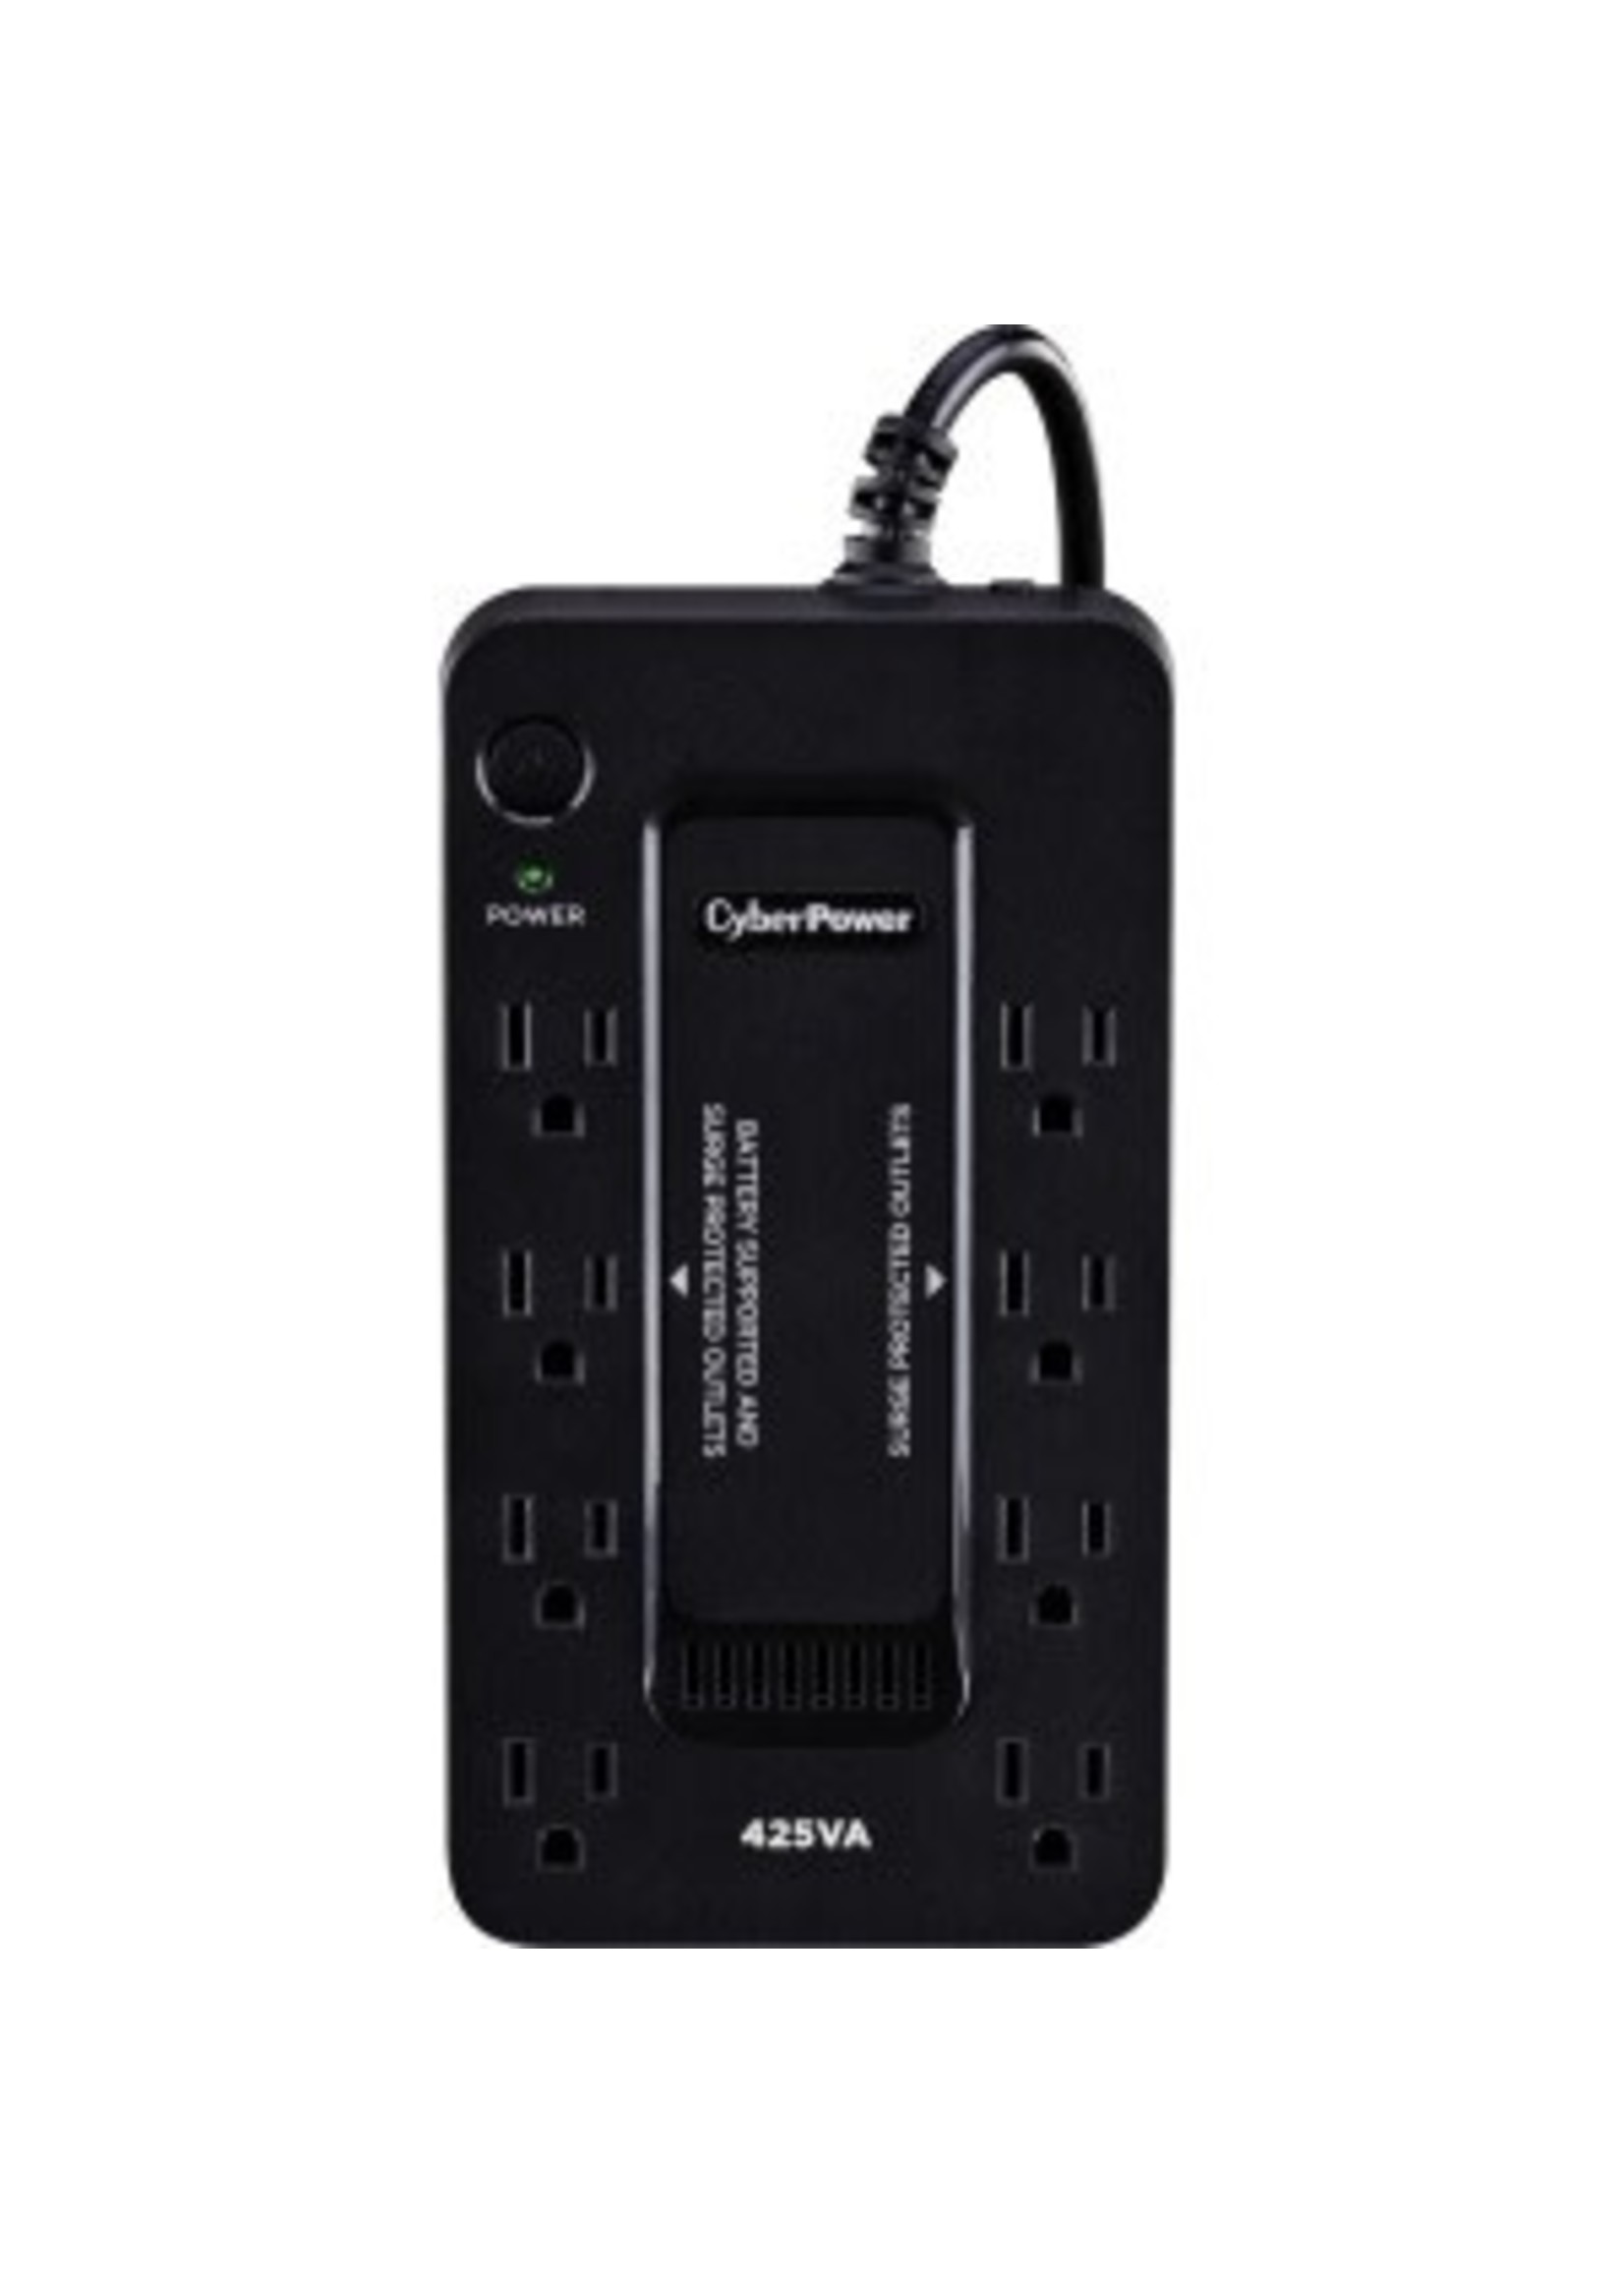 CyberPower CyberPower ST425 Standby UPS Systems